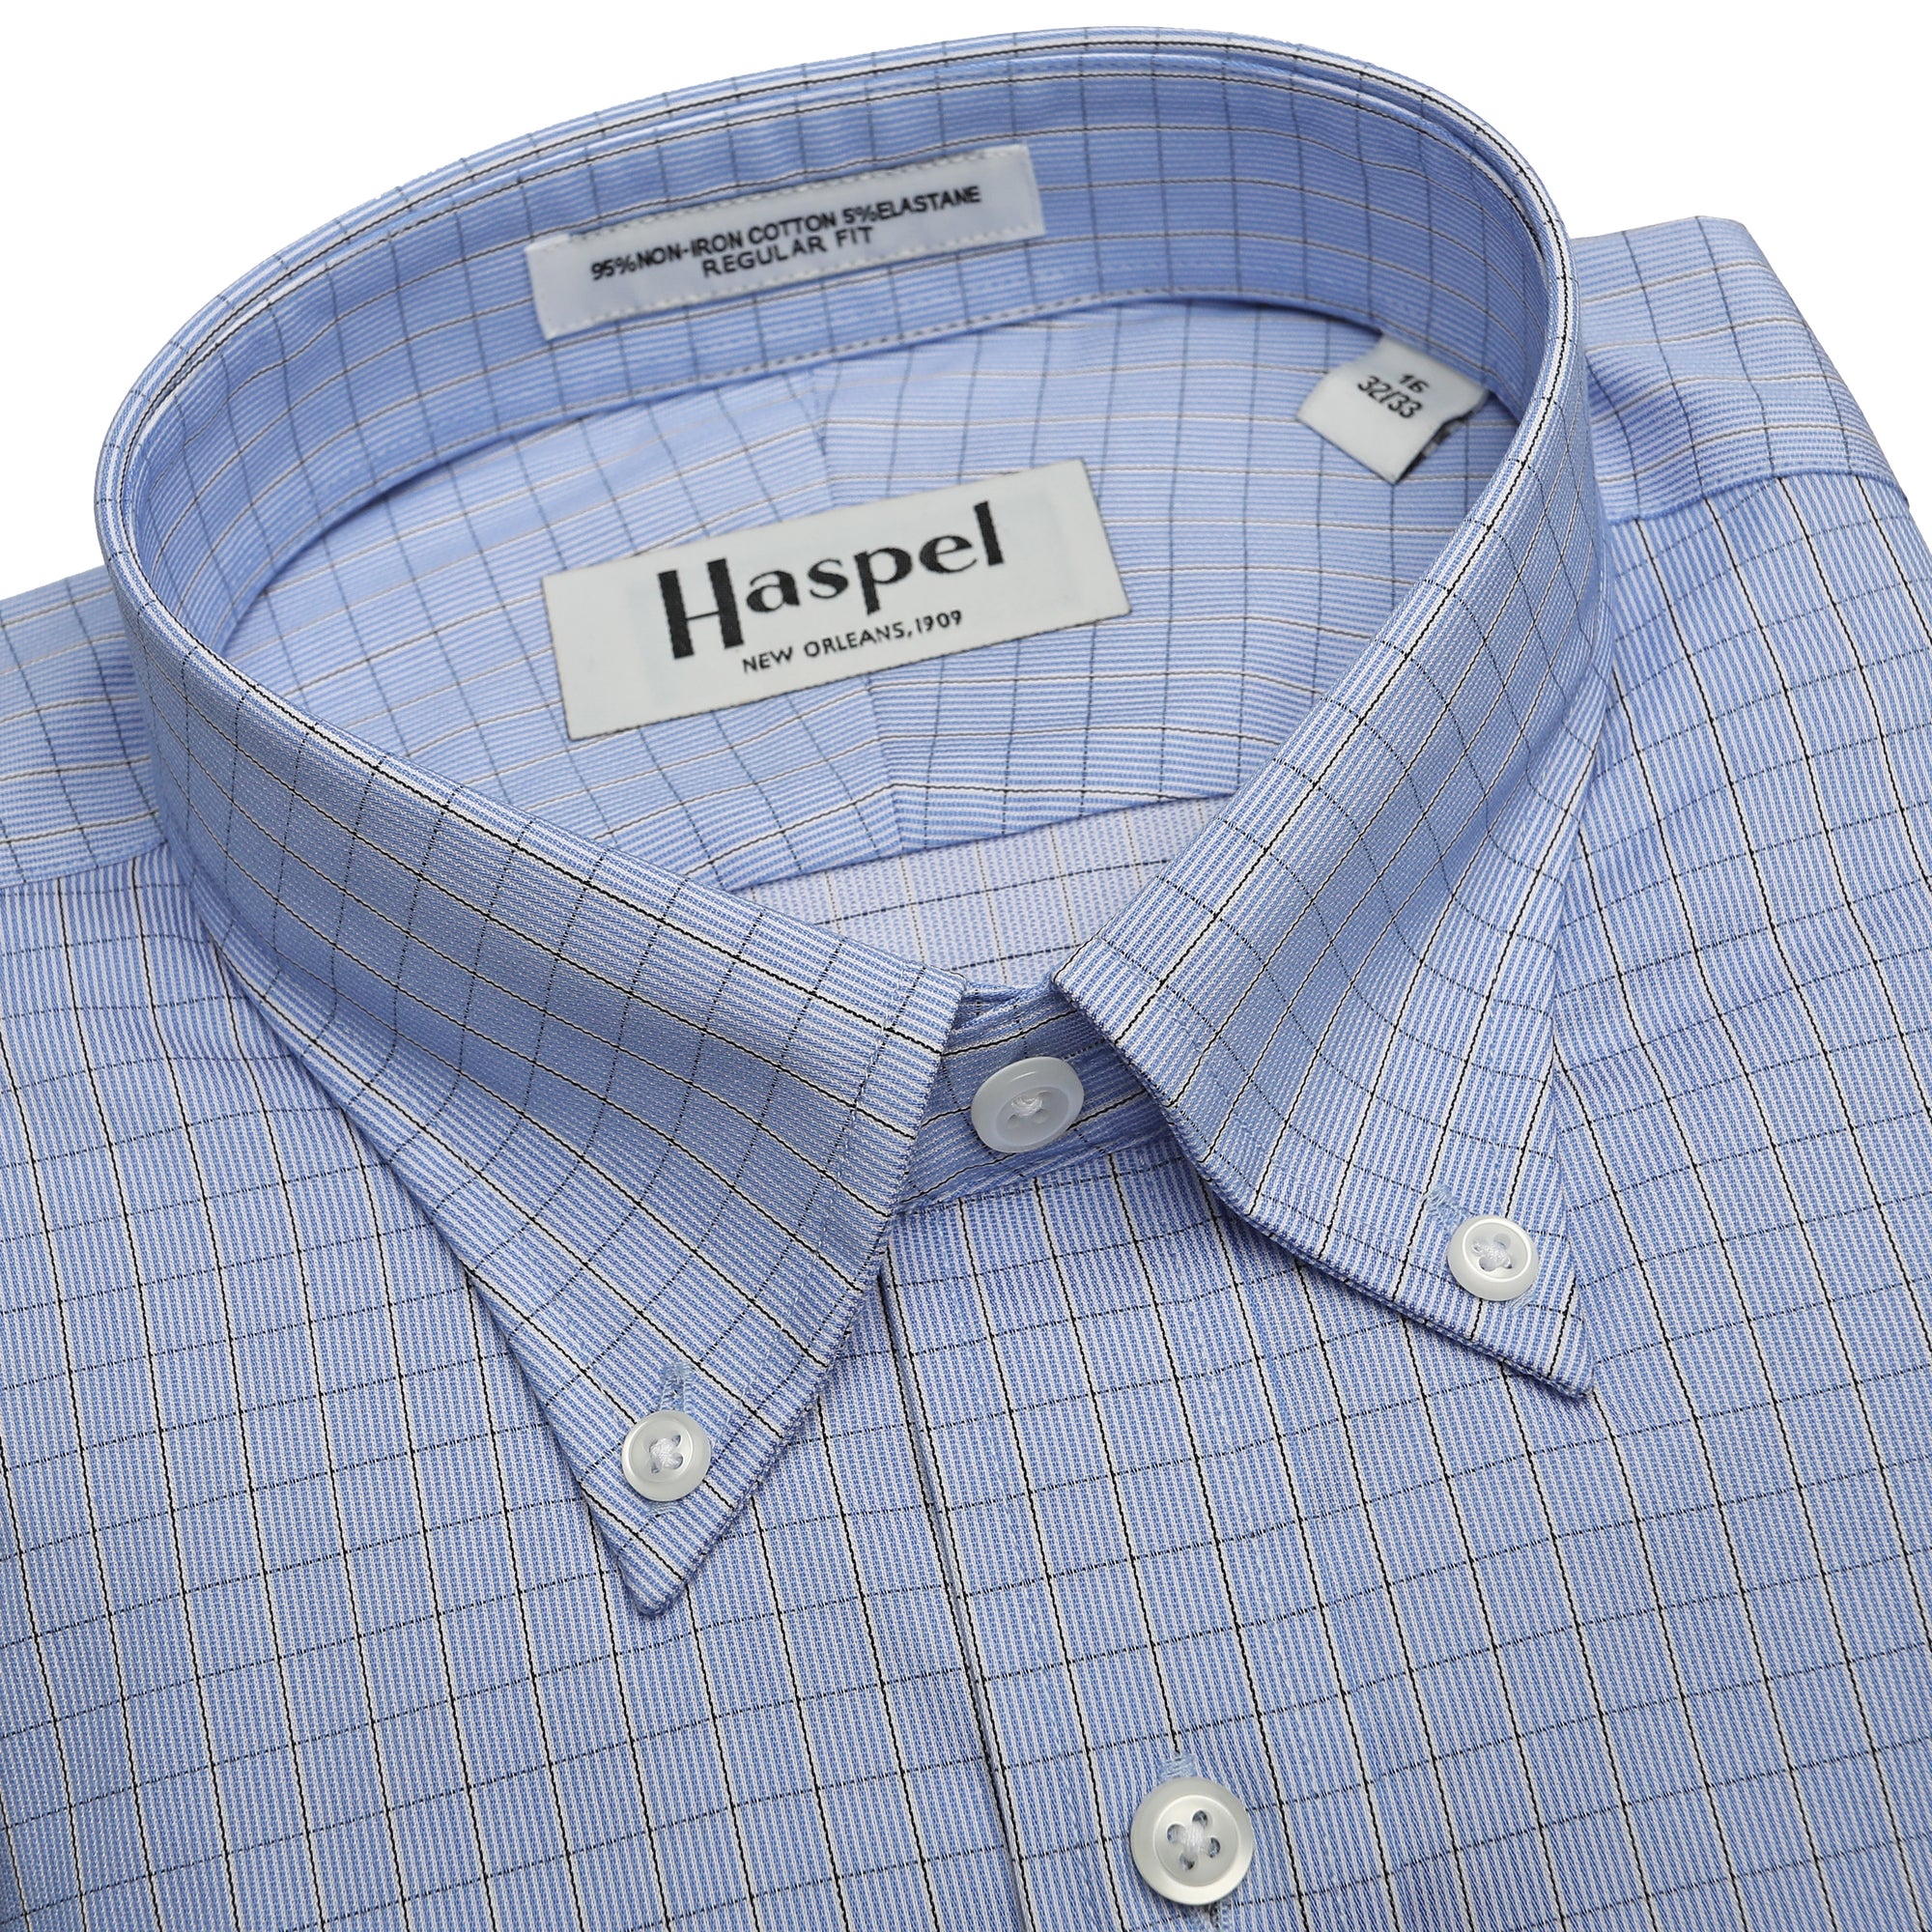 No hassle, only Haspel means no wasting time on multiple websites to complete your look. You can find all the classic men's dress shirts here that were carefully chosen to pair up with our unique, lightweight men's suits.  100% Imported Combed Cotton • 80's 2-Ply/Non-Iron Pinpoint Fabric • Button Down Collar • Long Sleeve, Button Cuff